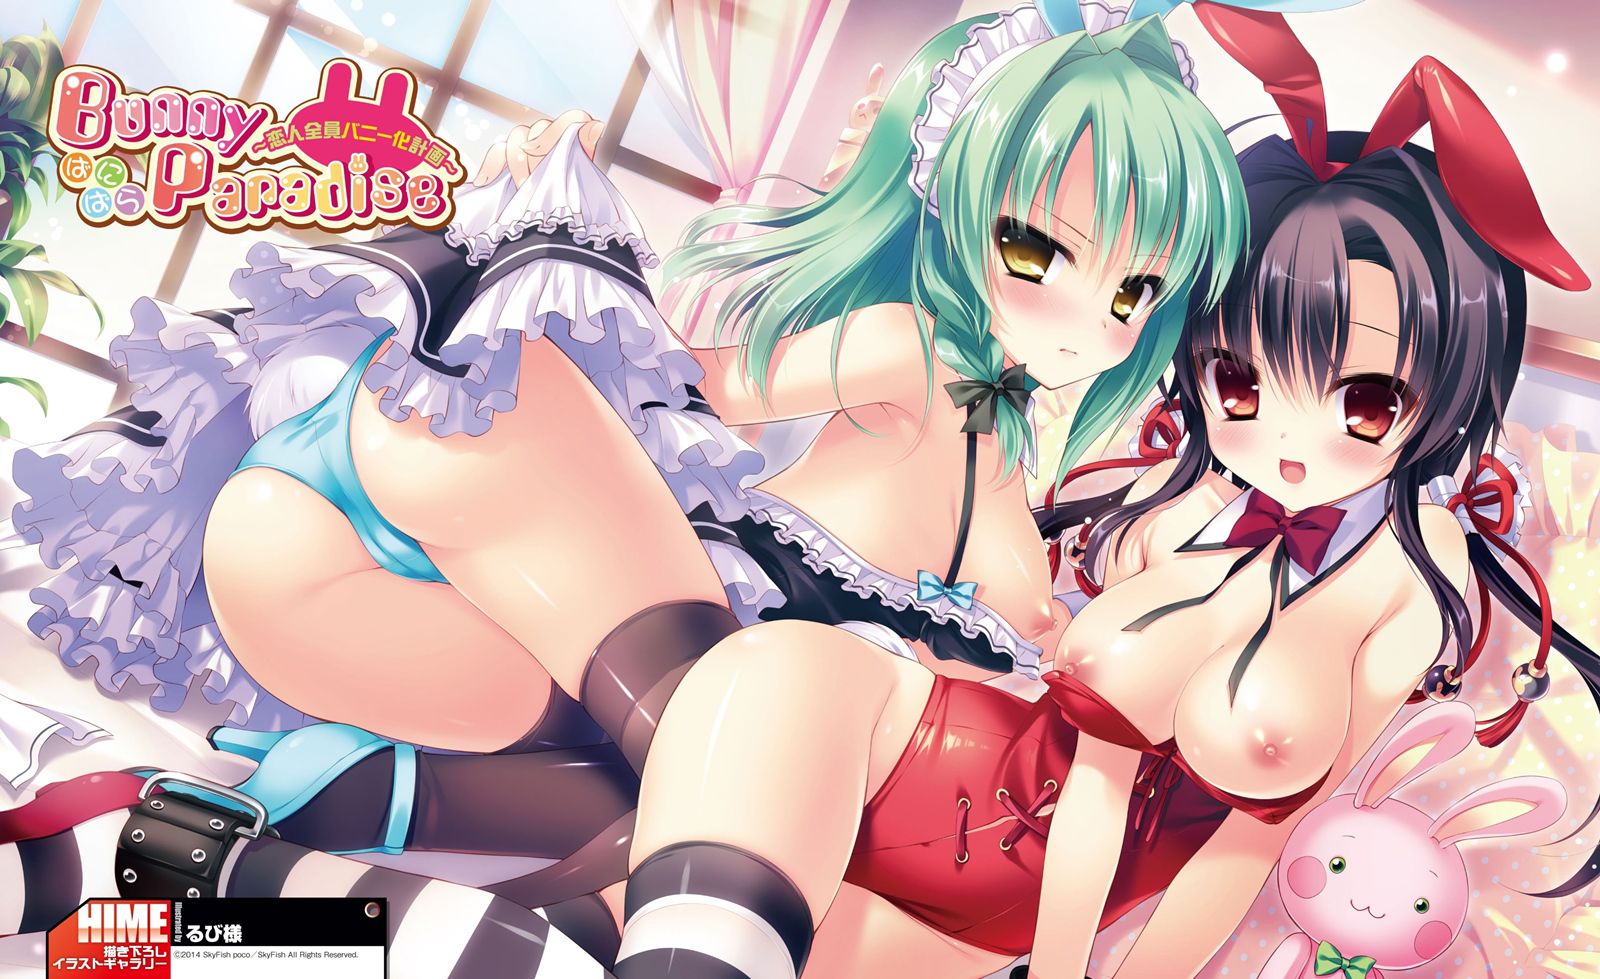 Bunny Paradise carried on from [under age 18 prohibited eroge HCG] erotic pictures part 1 1